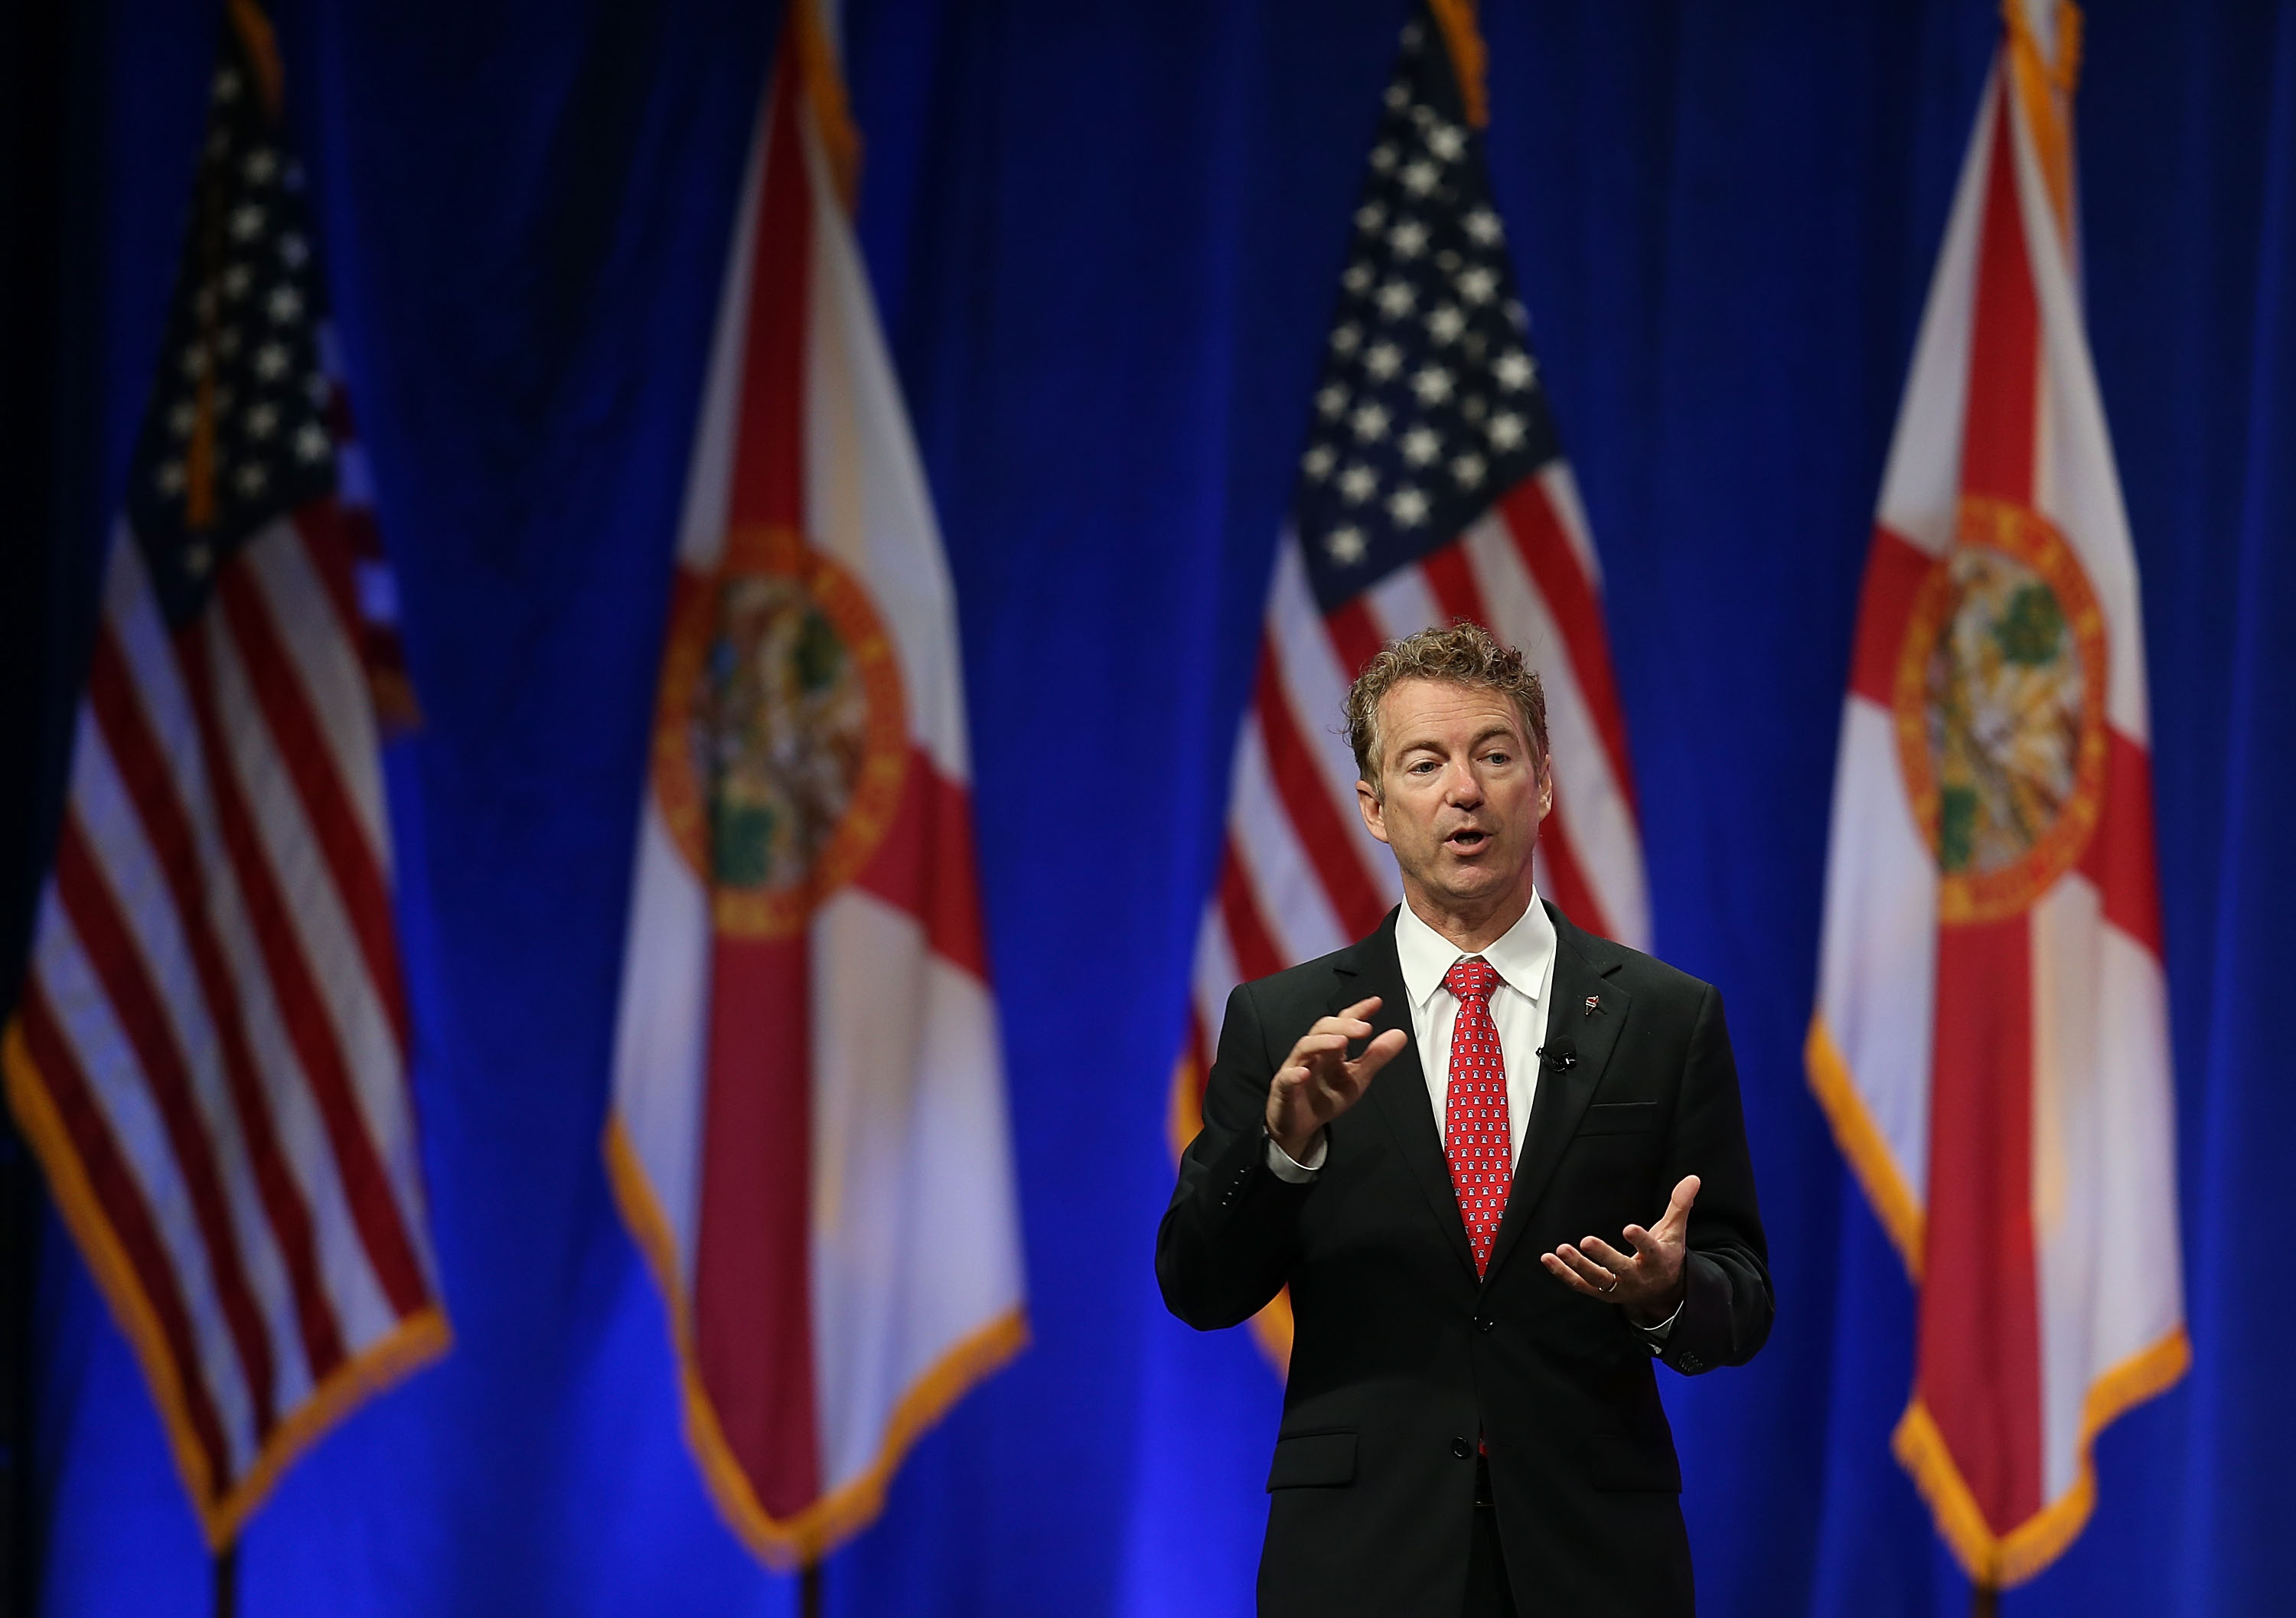 Republican presidential candidate Sen. Rand Paul (R-KY)  speaks during the Sunshine Summit conference being held at the Rosen Shingle Creek in Orlando, Florida, on Nov. 14, 2015.